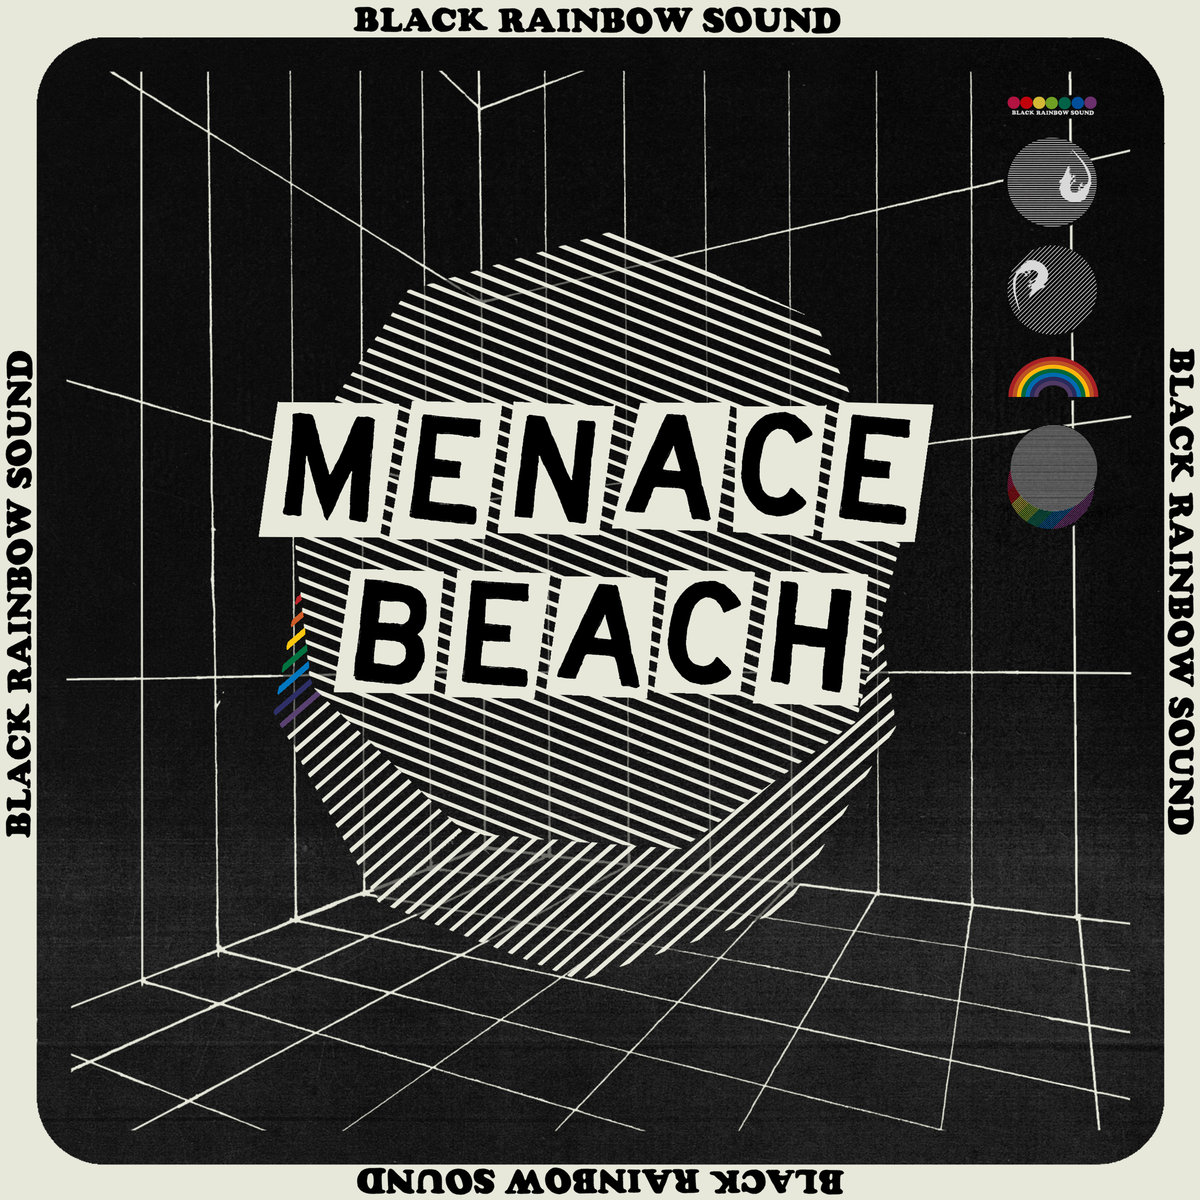 Menace Beach Black Rainbow Sound Review For Northern Transmissions